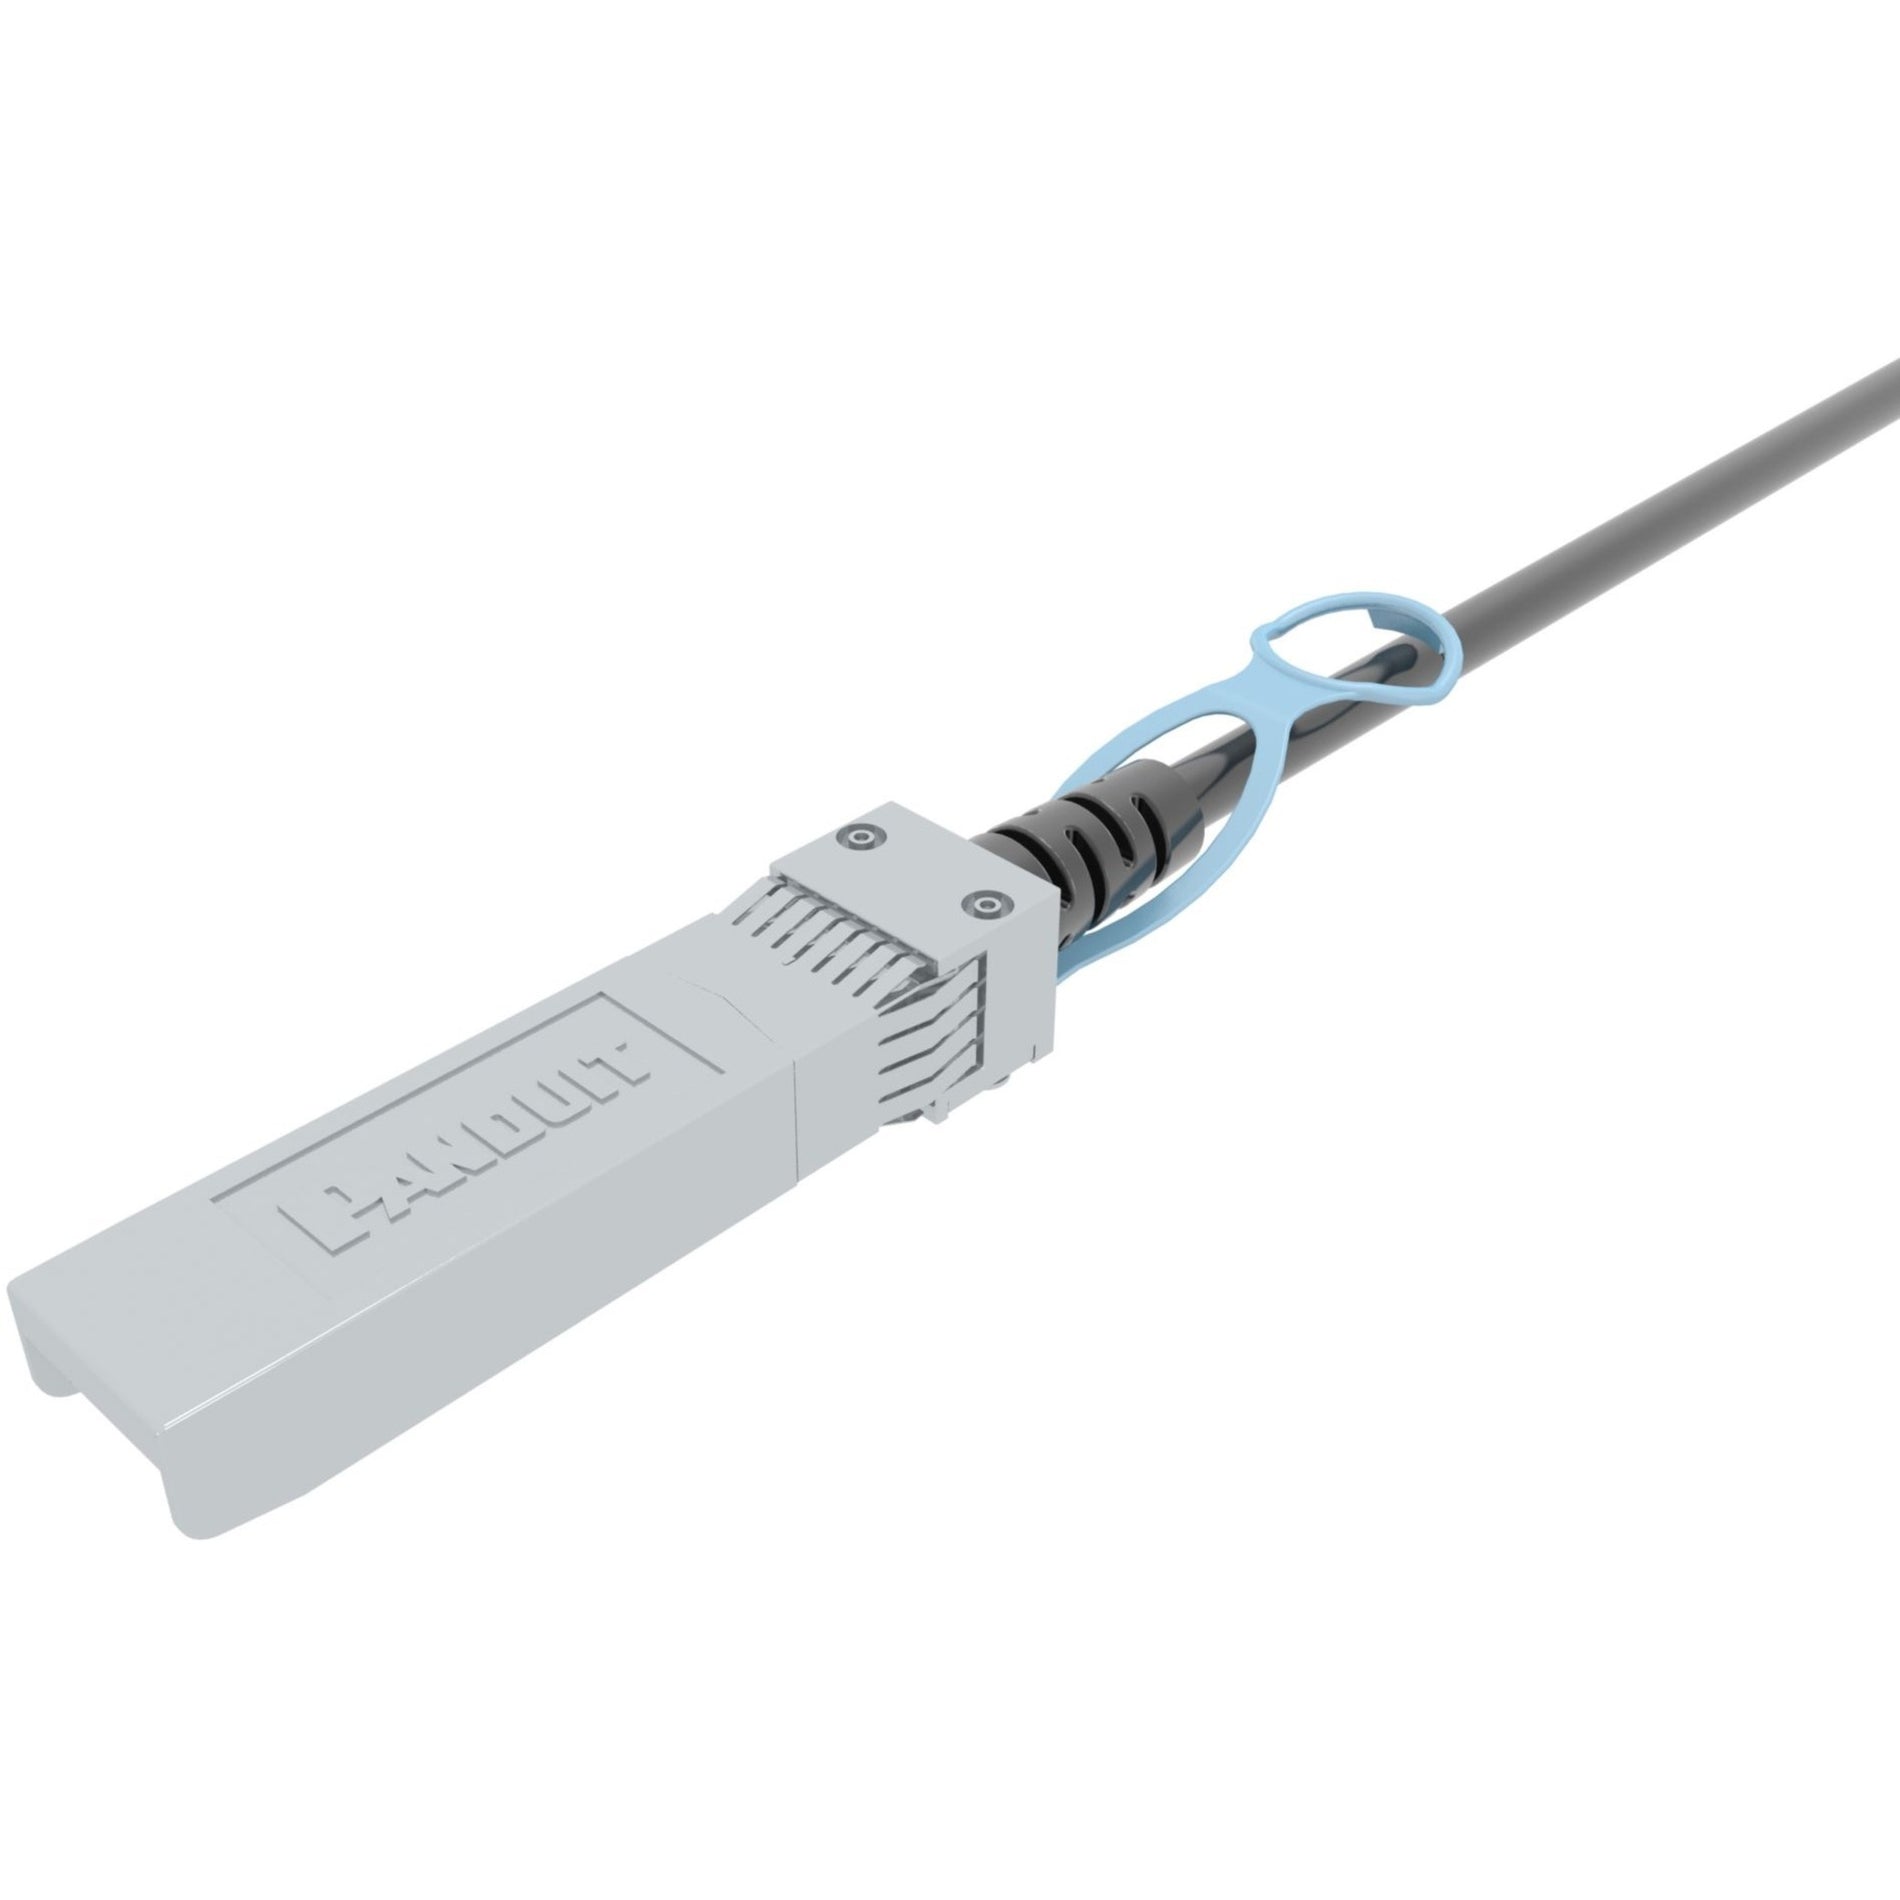 Panduit PSF2PZA2MBL Twinaxial Network Cable, 6.56 ft, 25 Gbit/s, Latching Connector, Flame Resistant